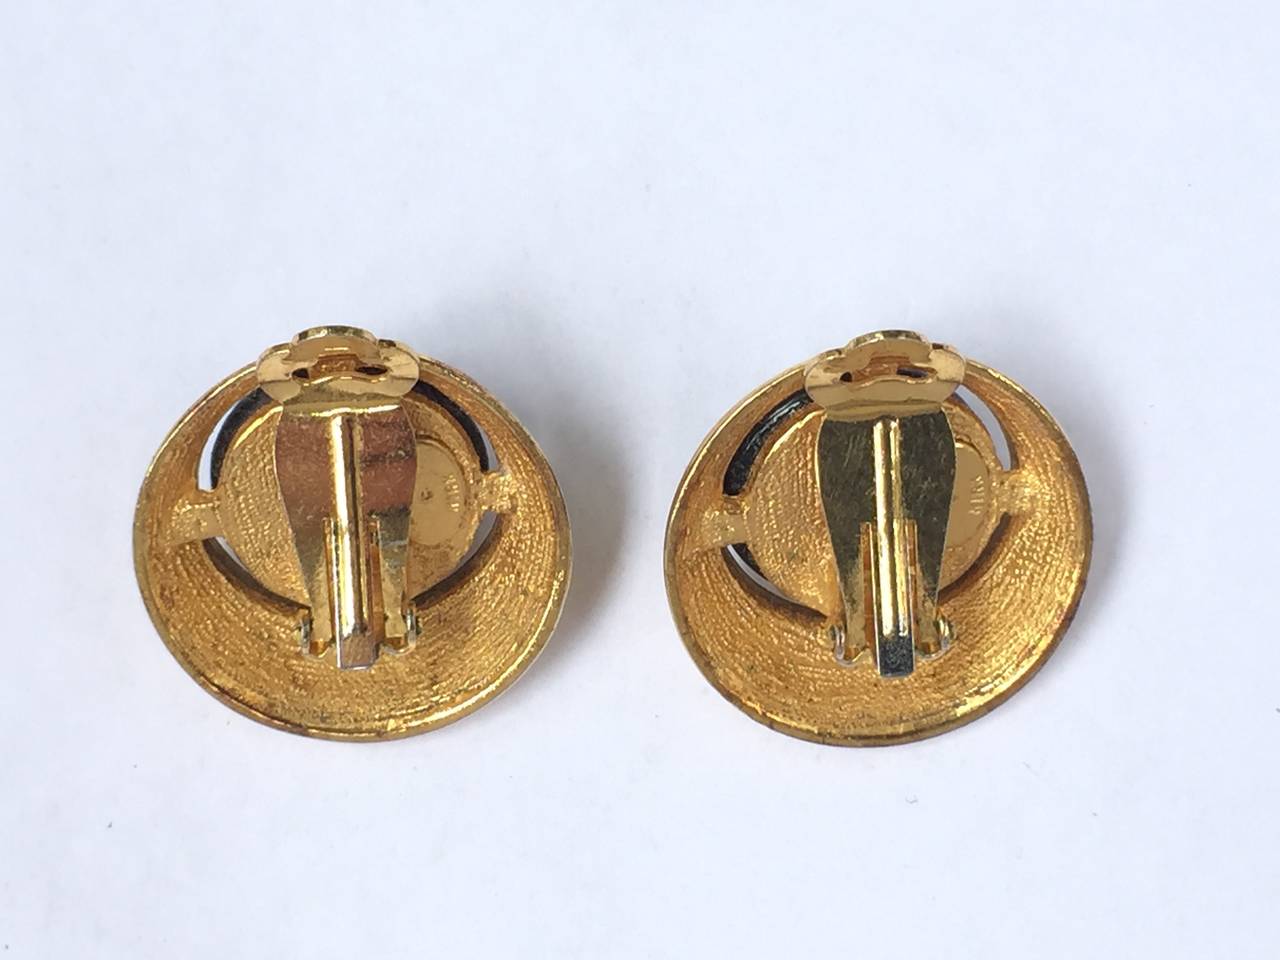 Alexis Kirk 1980s gold with black glass round center clip earrings.
These Alexis Kirk earrings were given to my client by Ed Riley who worked for Alexis Kirk back in the 80s. Ed Riley then worked for Halston.
Measurement:
1.1/4" diameter.